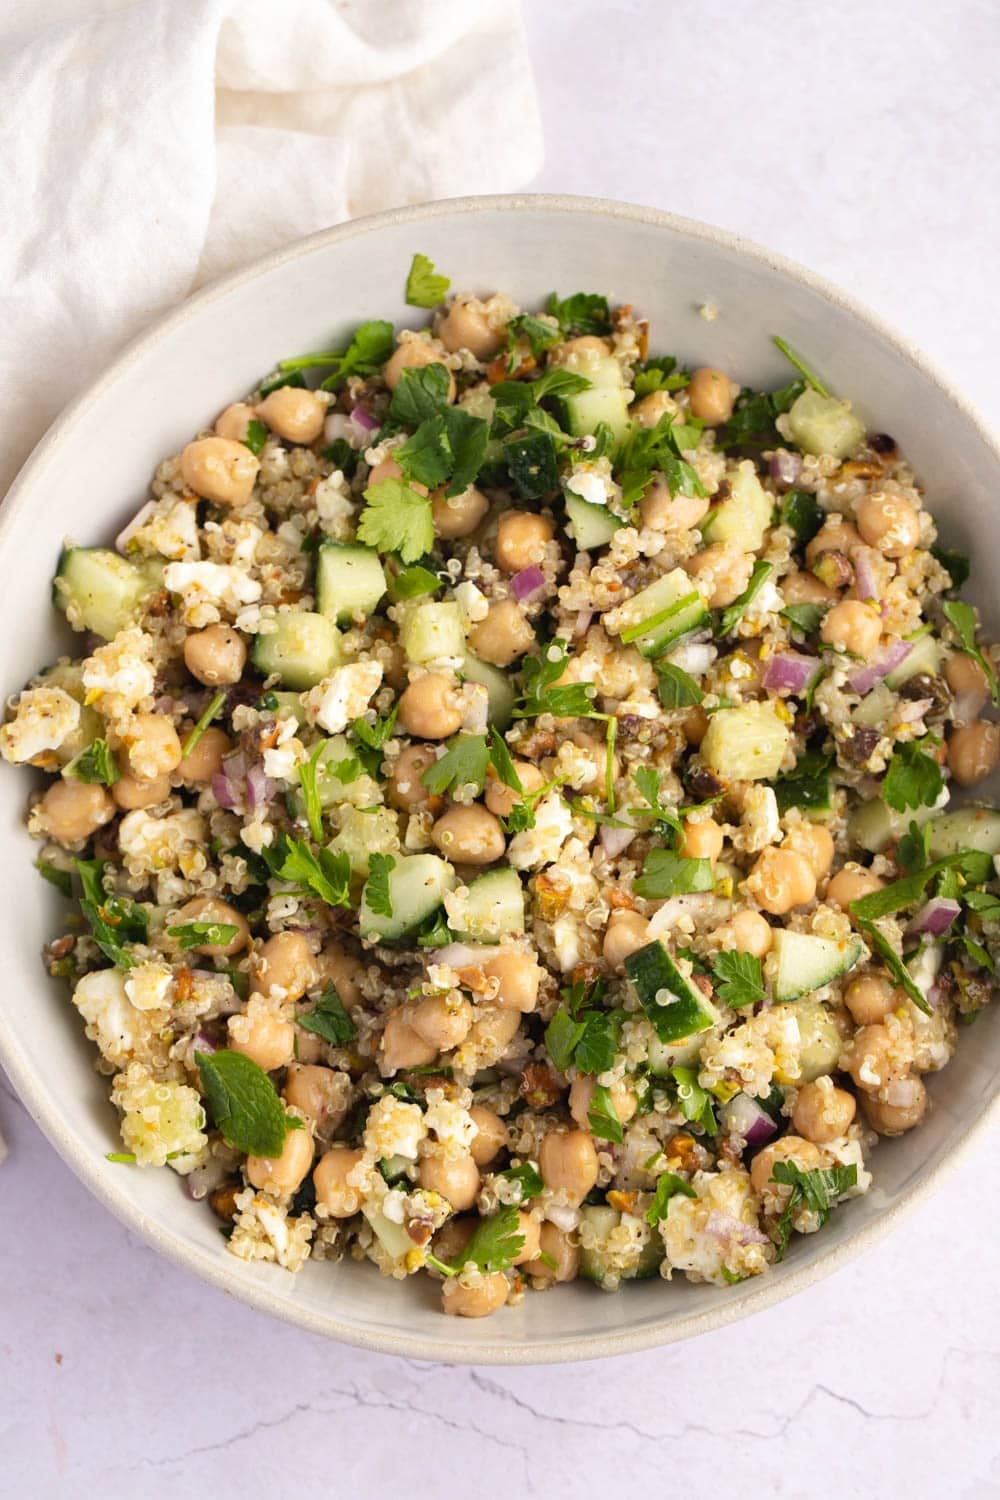 Salad with Quinoa, Peas, Parsley and Cucumber